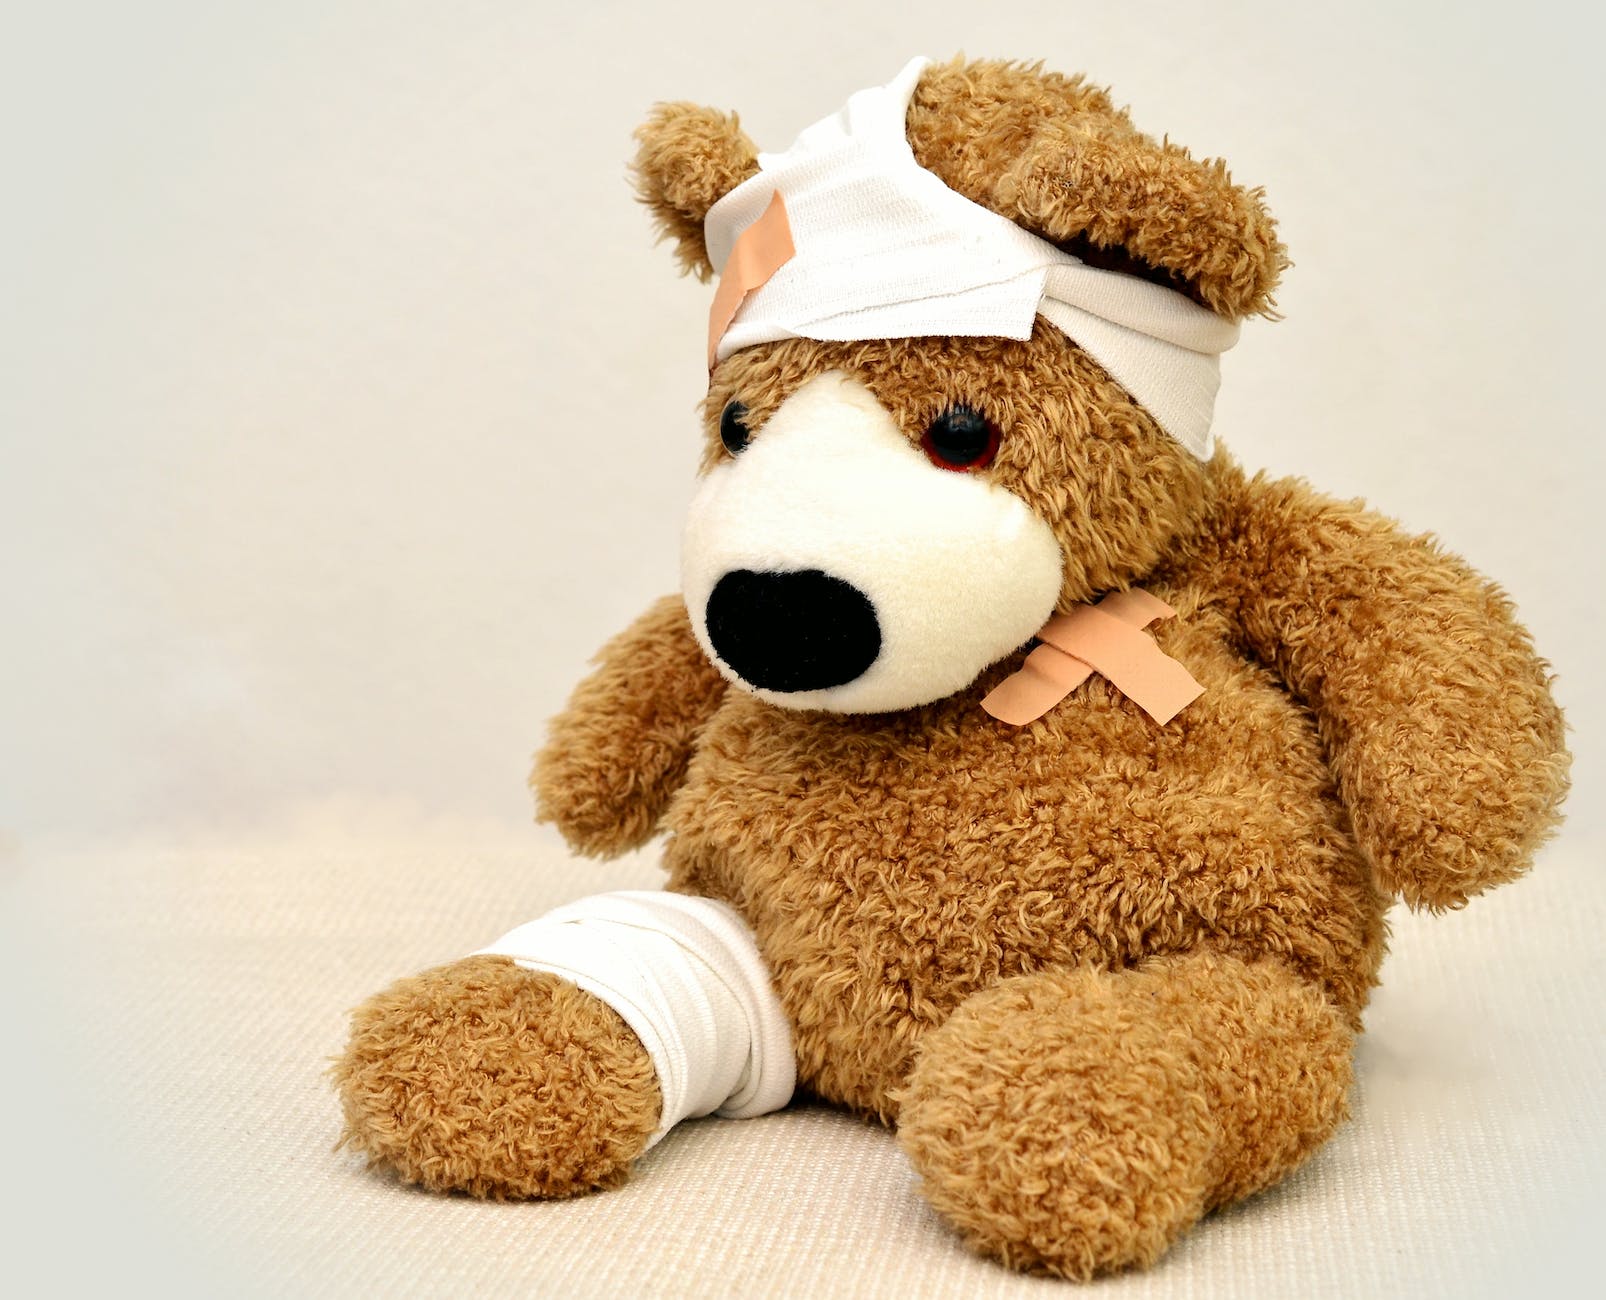 brown and white bear plush toy depicting common trampoline injuries